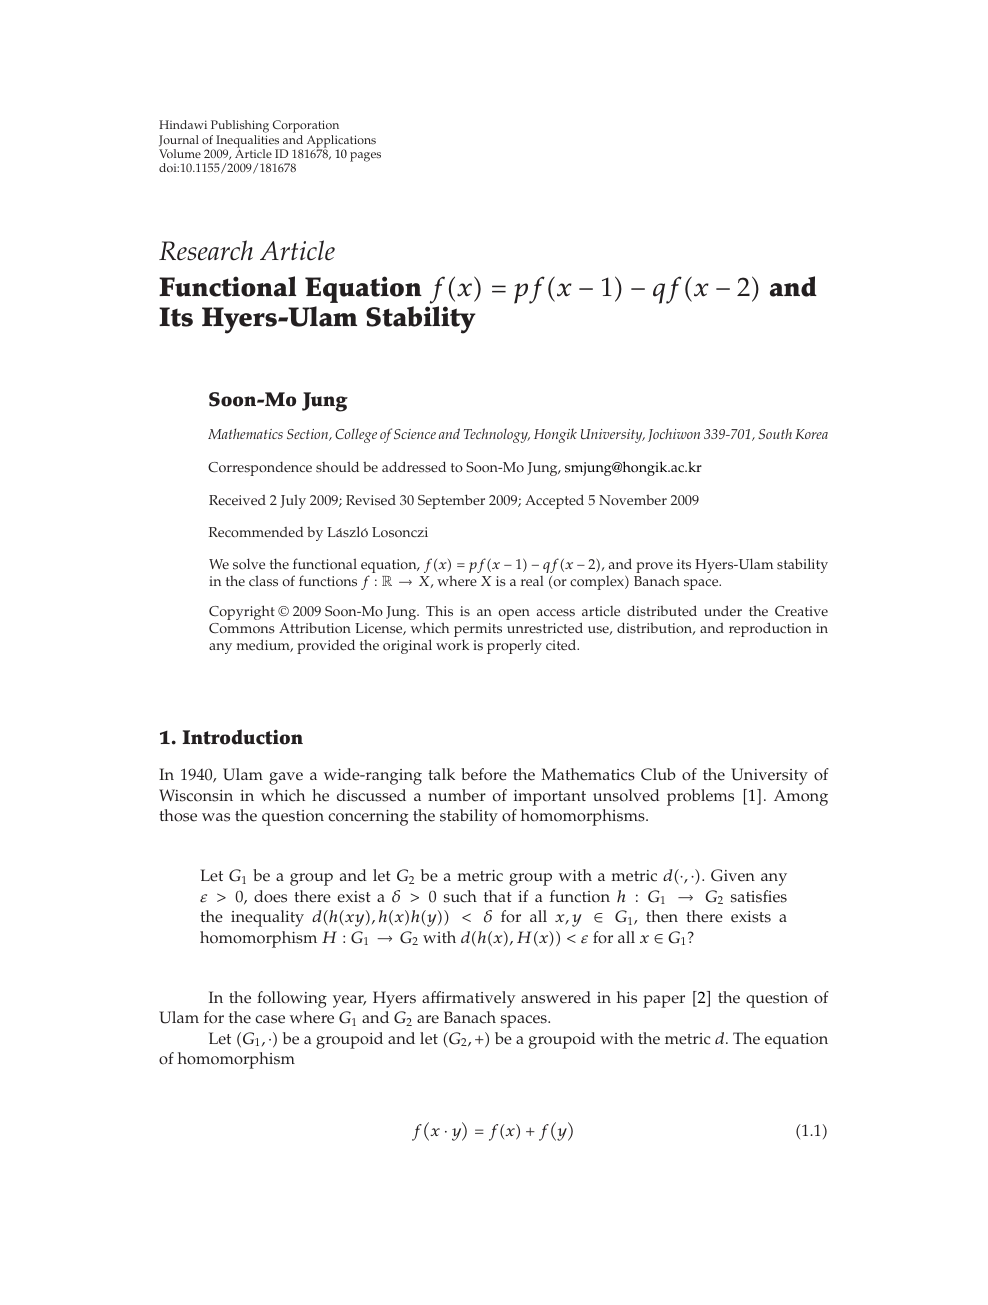 Functional Equation And Its Hyers Ulam Stability Topic Of Research Paper In Mathematics Download Scholarly Article Pdf And Read For Free On Cyberleninka Open Science Hub